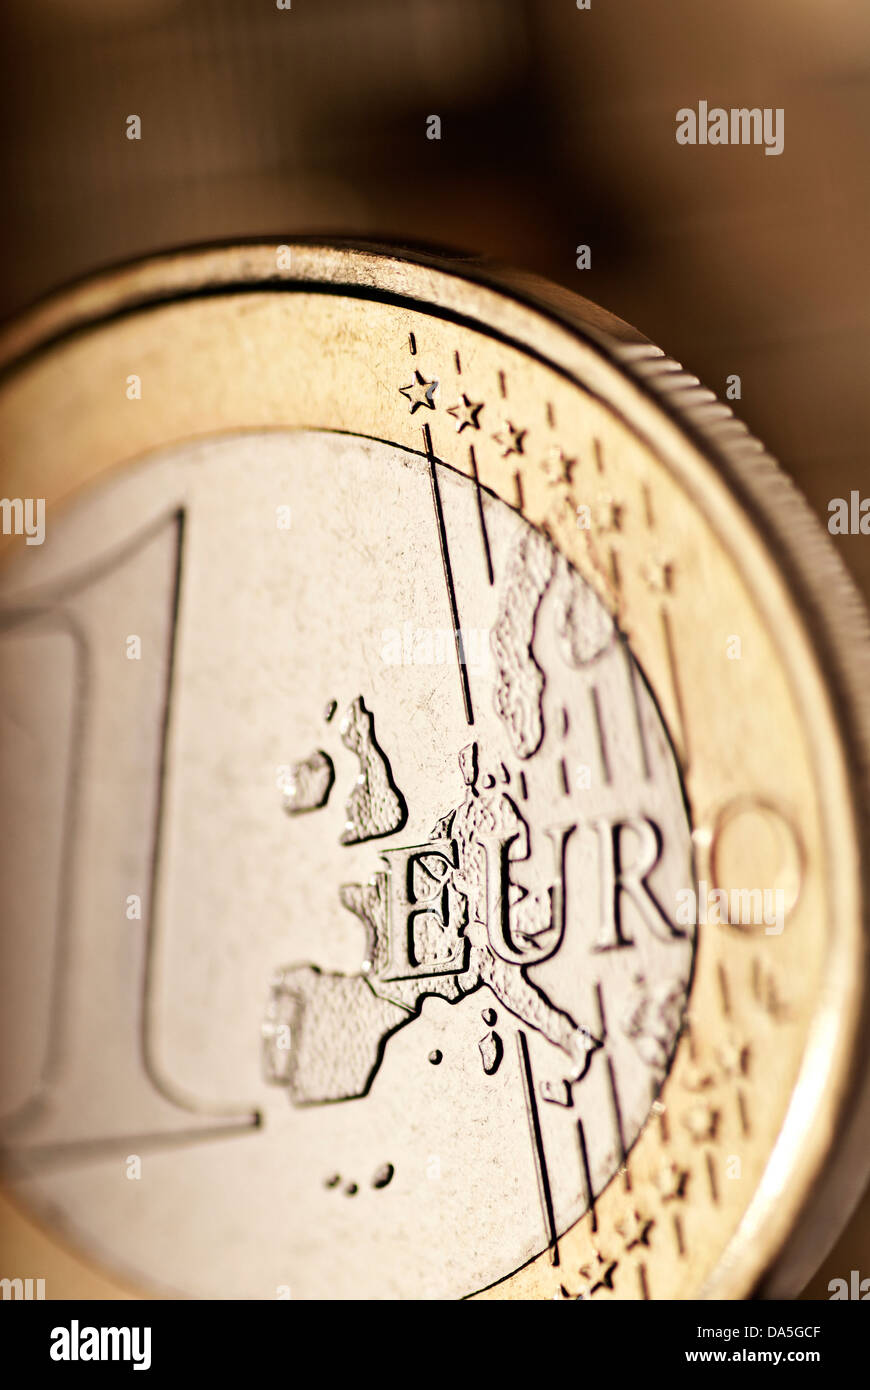 Detail of a One € coin with selective focus. Stock Photo